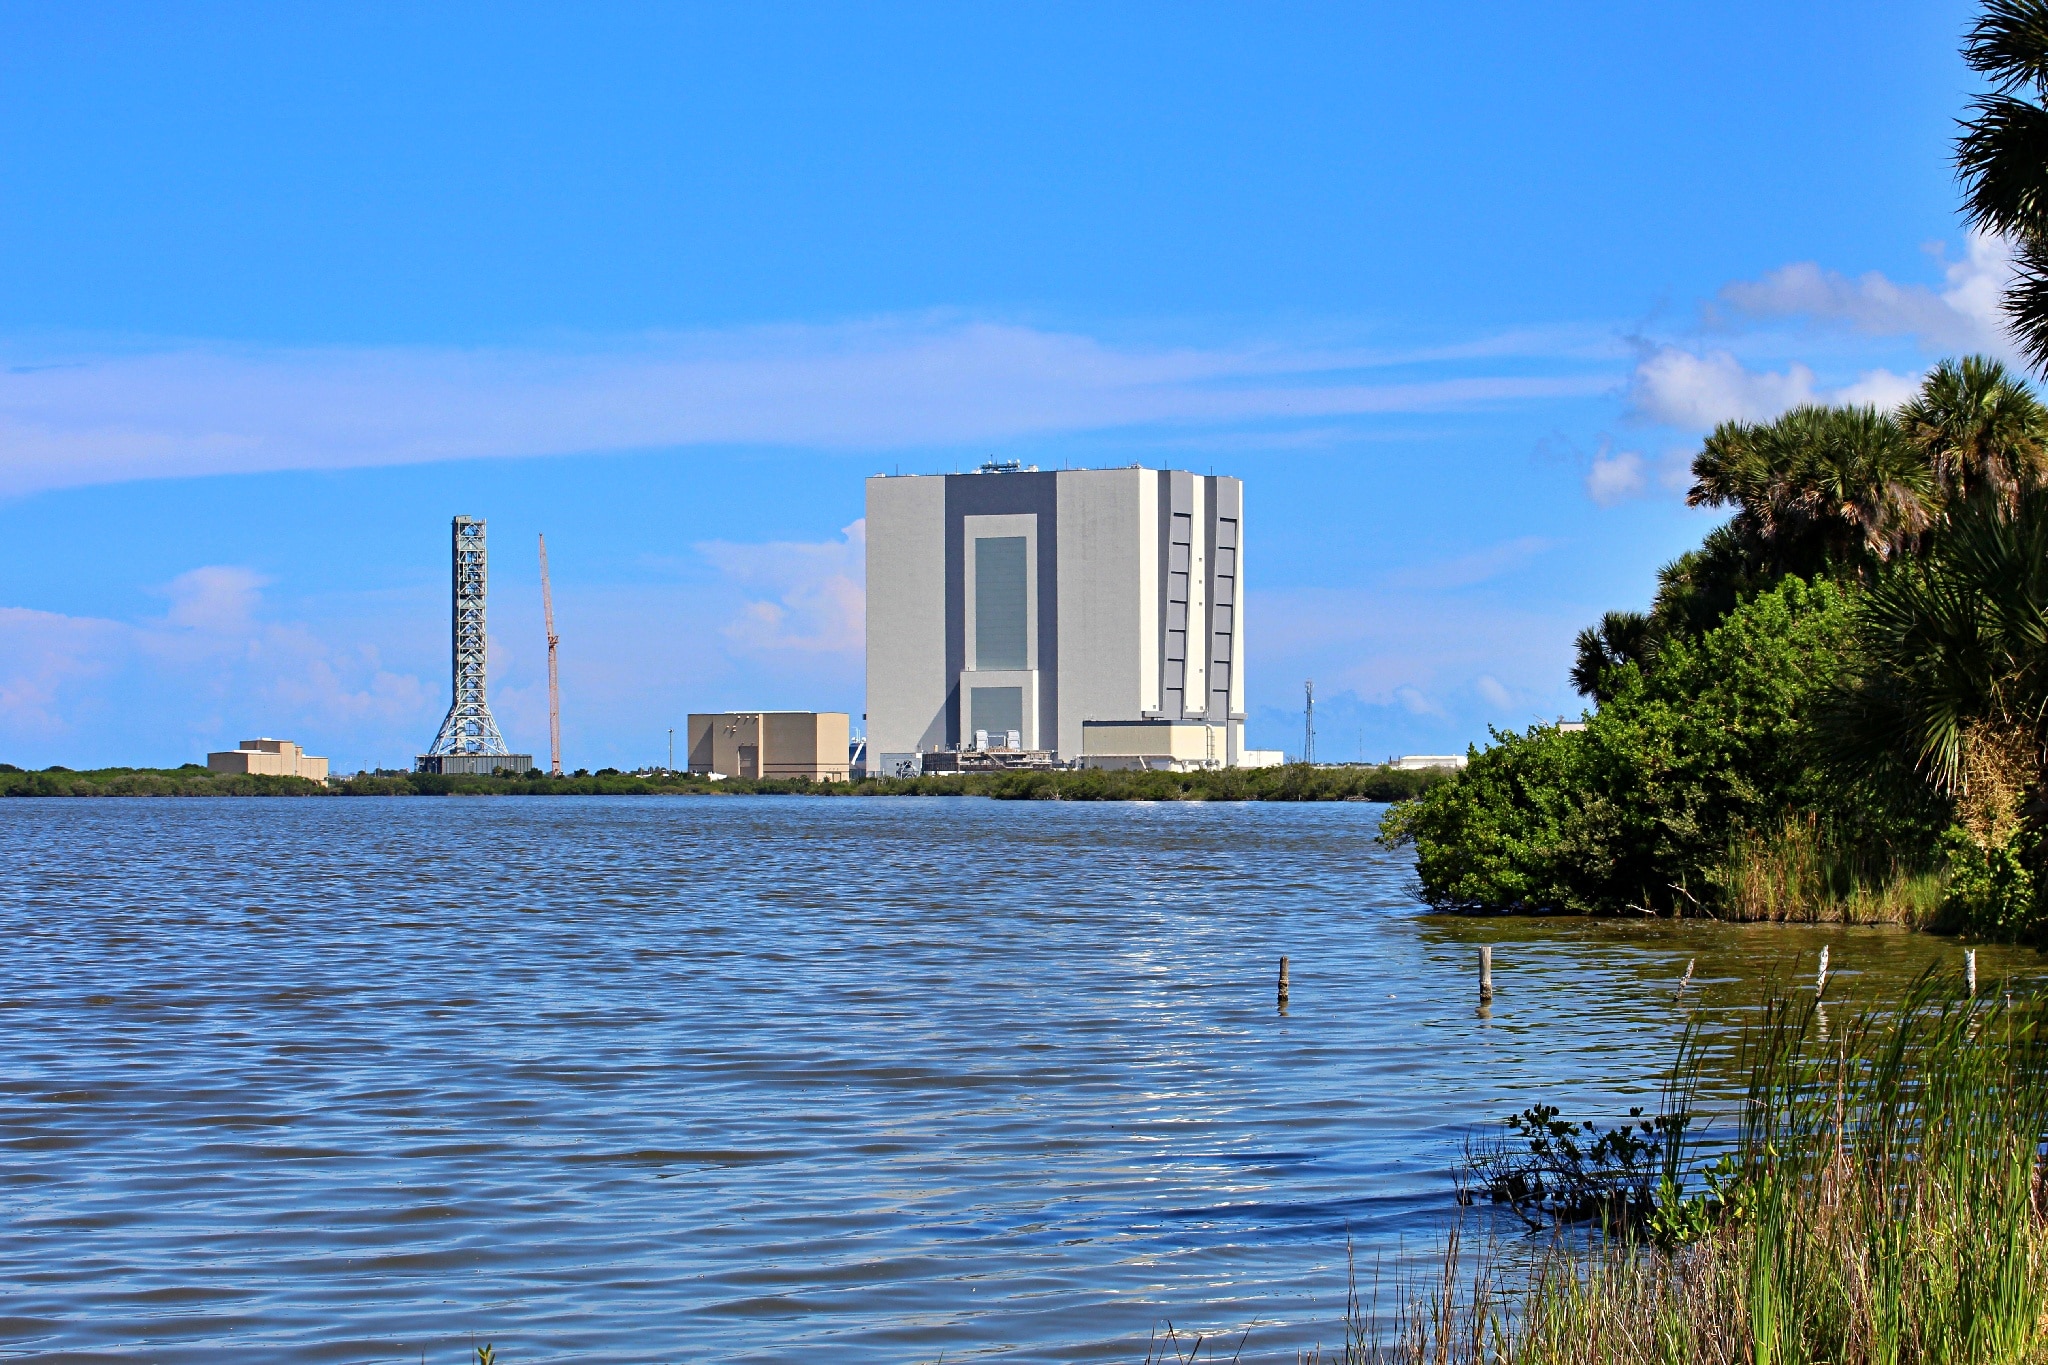 Info Shymkent - Launch Schedule 2022 - Vertical Integration Building and SLS launch tower in KSC, Florida